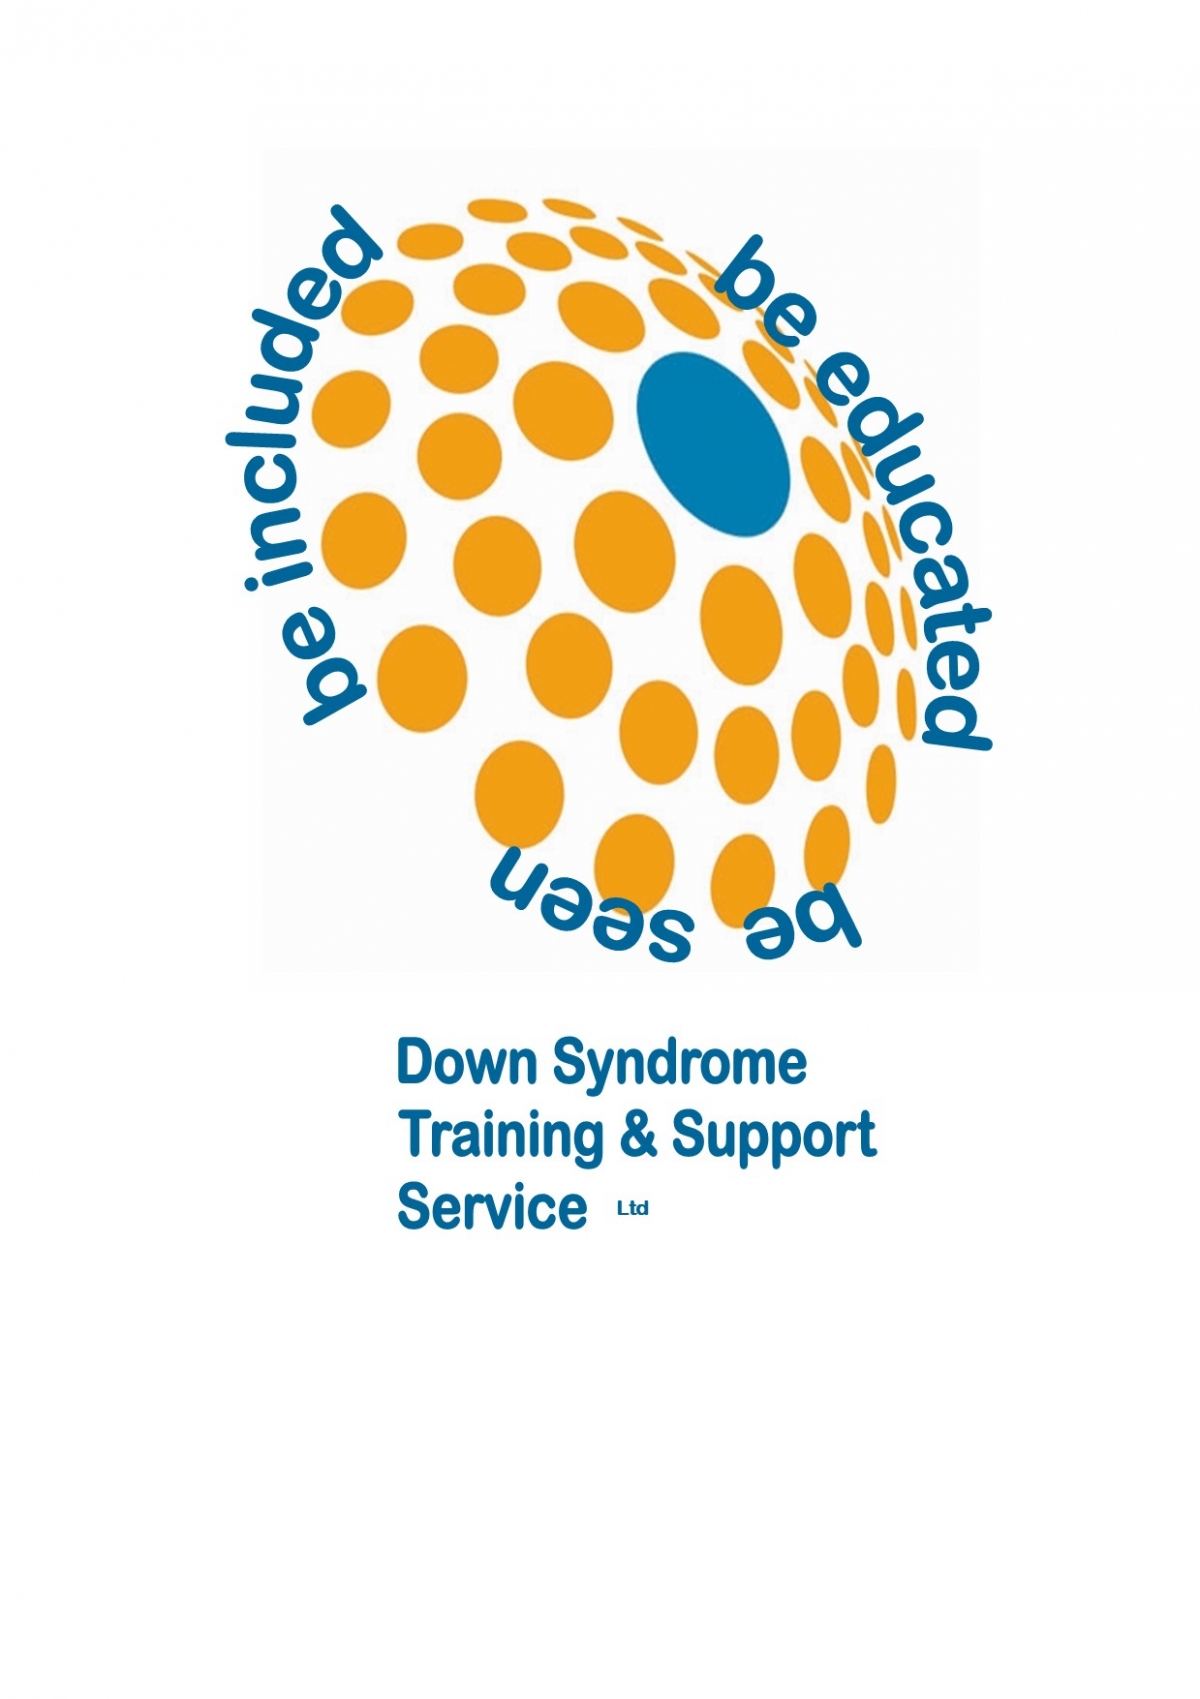 Down Syndrome Training & Support Service Ltd eCards